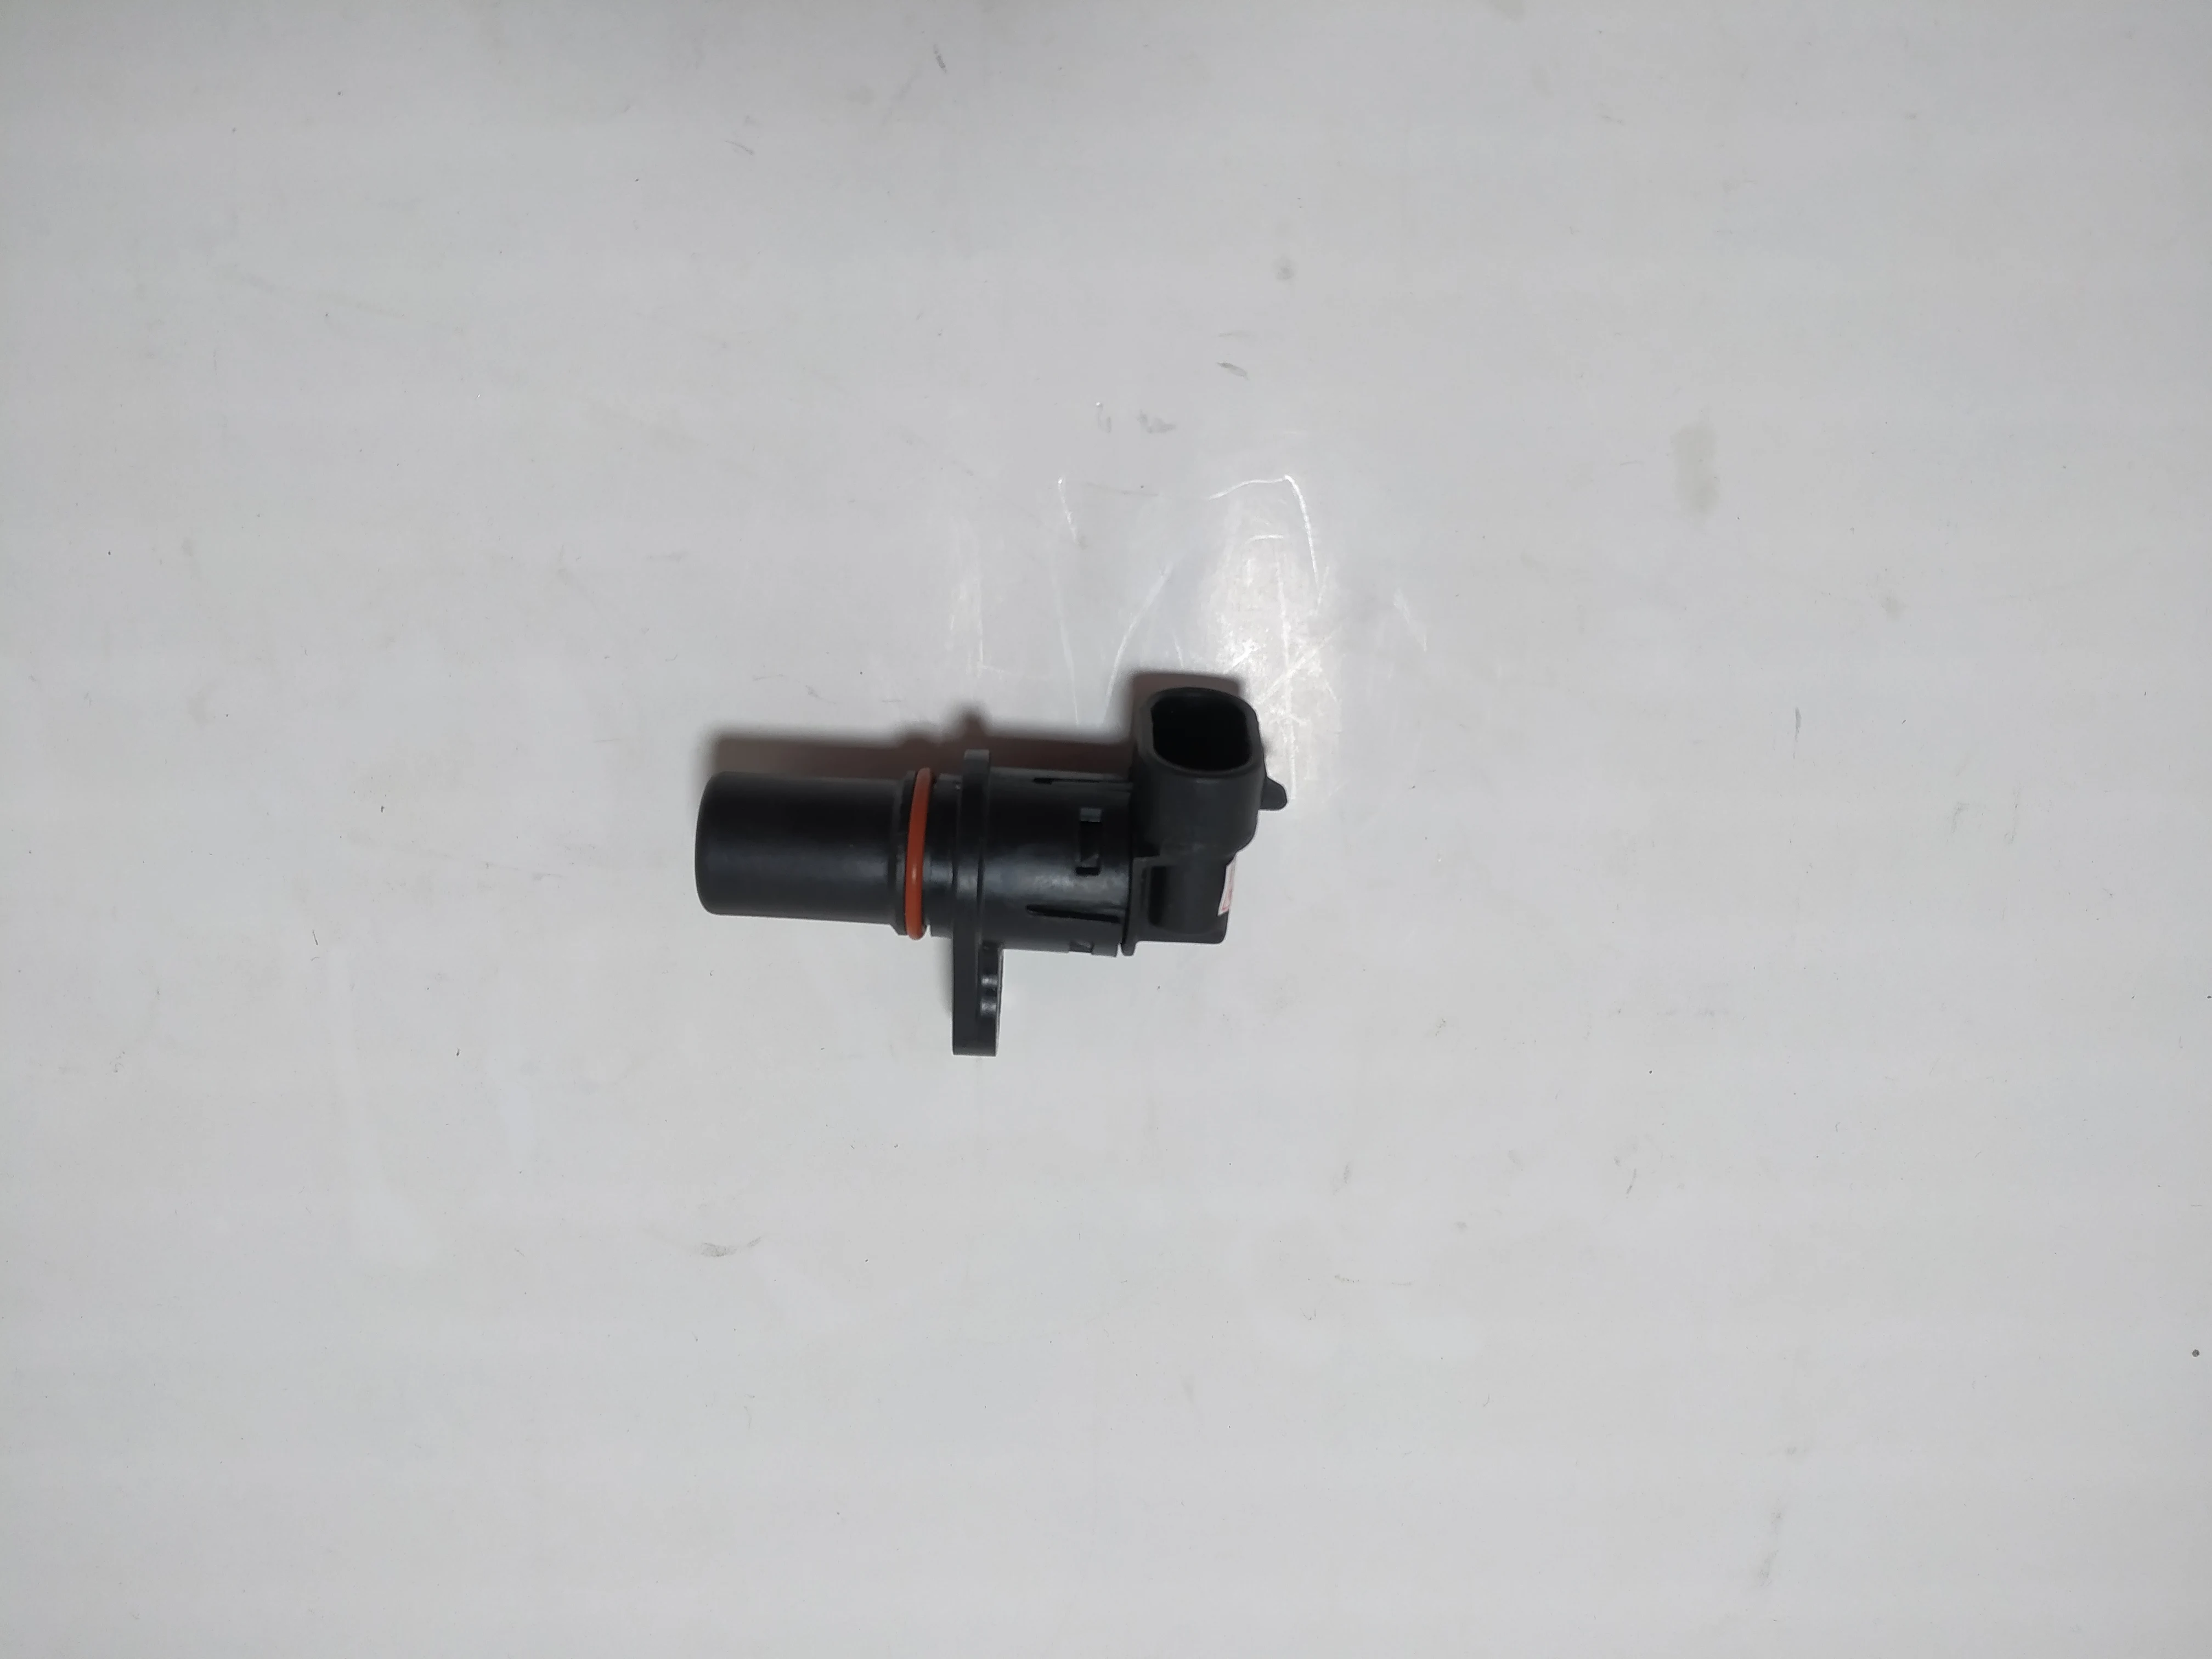 GTH5191 GTH 5191 B307173770 SMW252117 GET85076 For Great Wall Wingle 5 6 7 4K22 4G69 Pickup H3 H5 4G63 Camshaft Position Sensor smw250510 great wall haval cuv h3 h5 wingle3 wingle5 ignition coil high voltage package suitable for gasoline 4g64 4g63 4g69